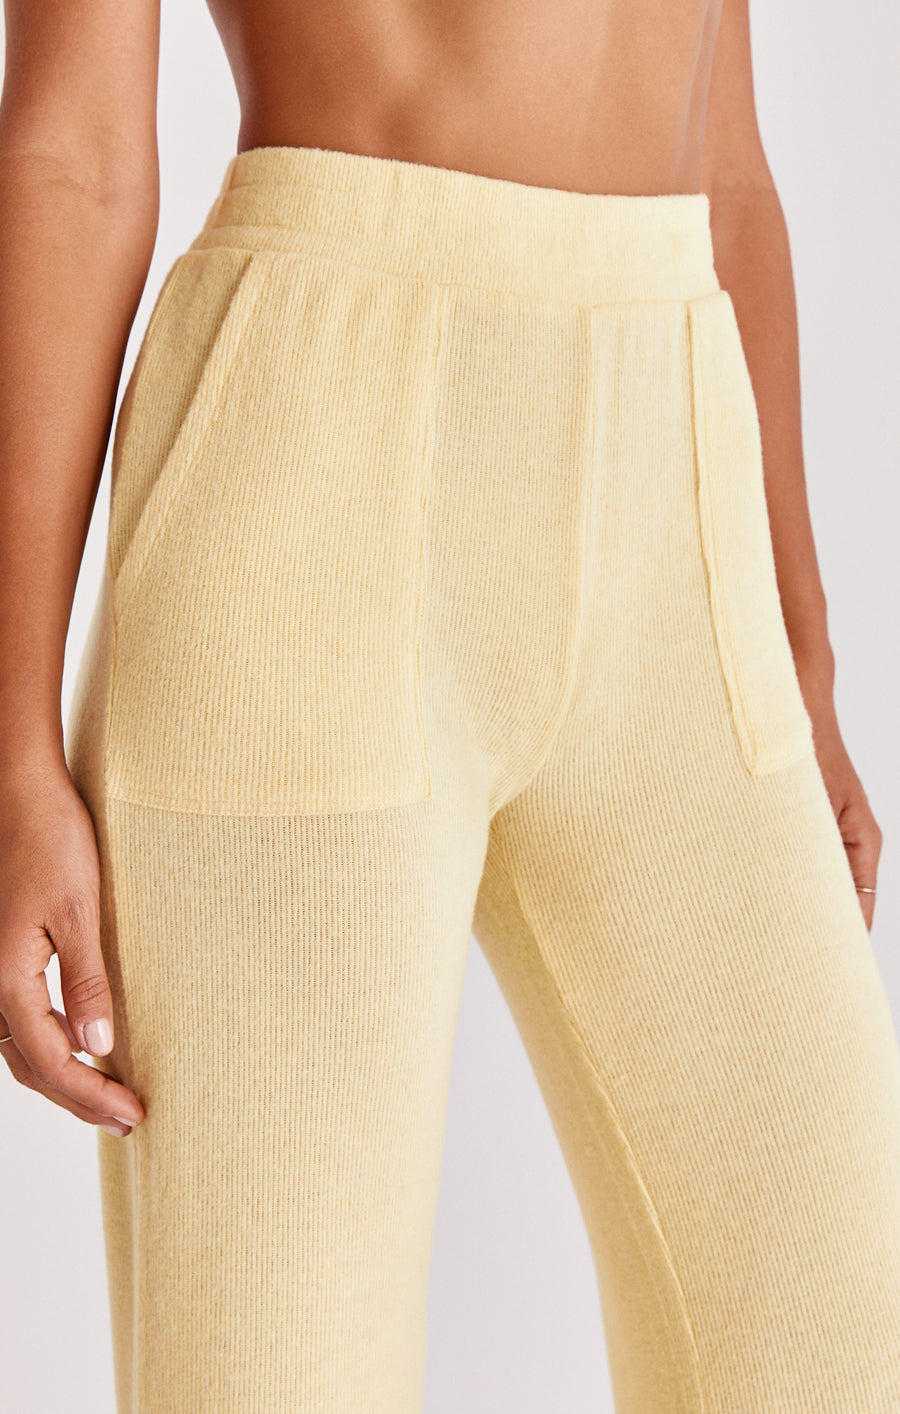 Morning Rib Pant - Sunflower | Z Supply - Clearance